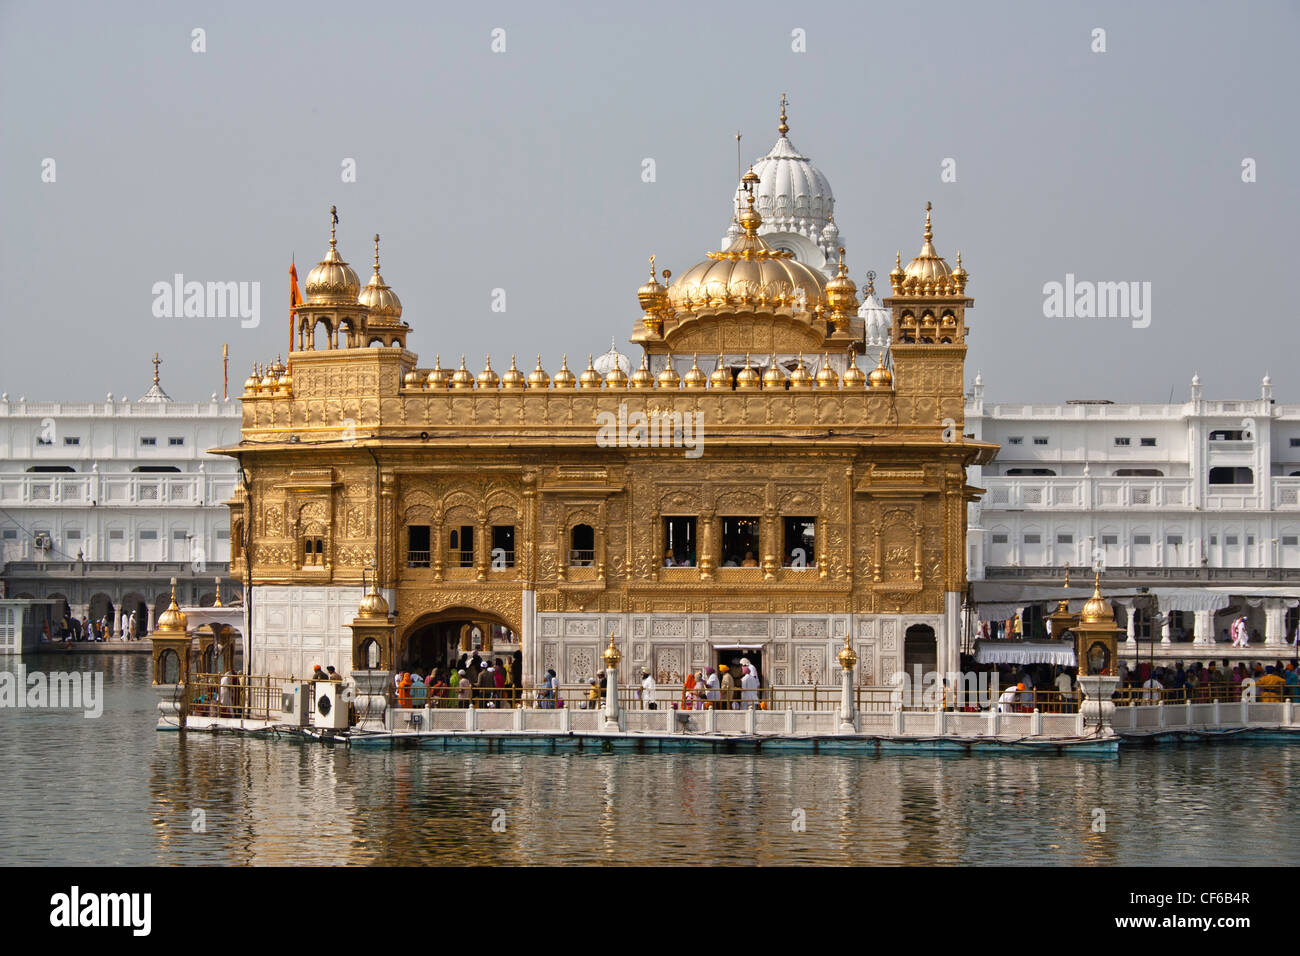 Darbar Sahib and Amrit Sarovar inside Golden Temple with devotees (men and women) on the causeway over the water body Stock Photo